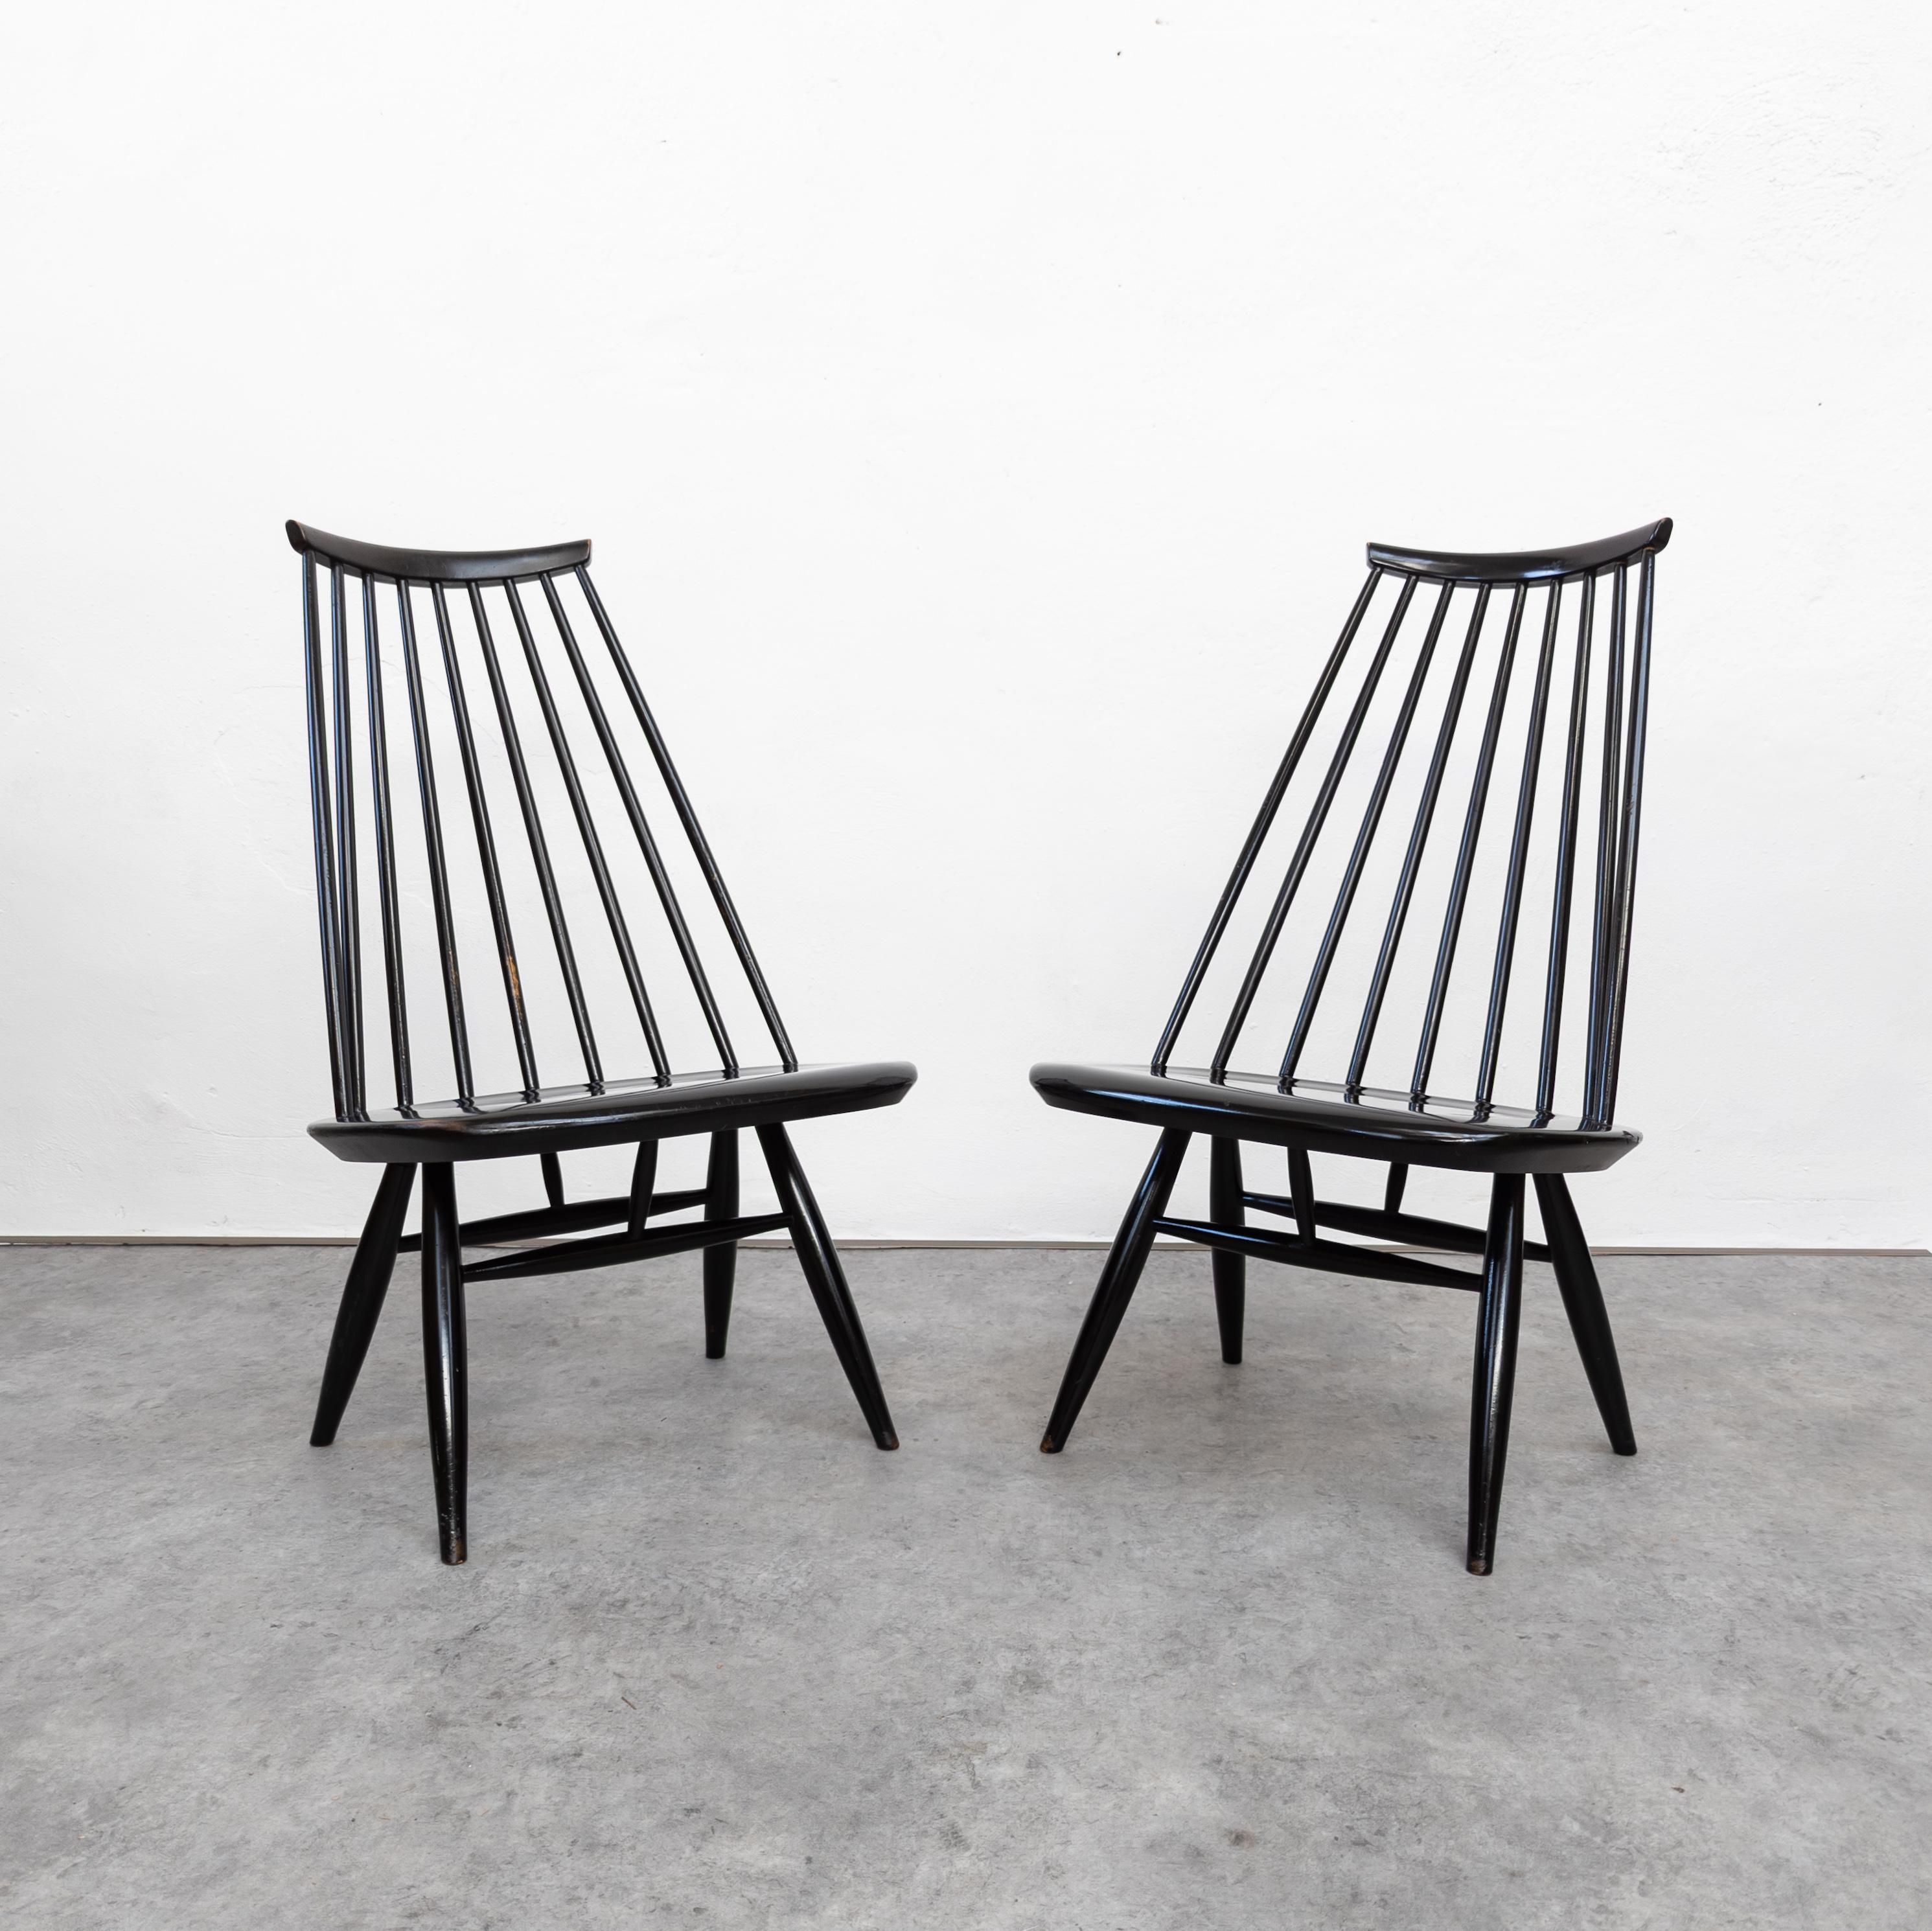 Lacquered Pair of early Mademoiselle Lounge Chairs by Ilmari Tapiovaara for Asko